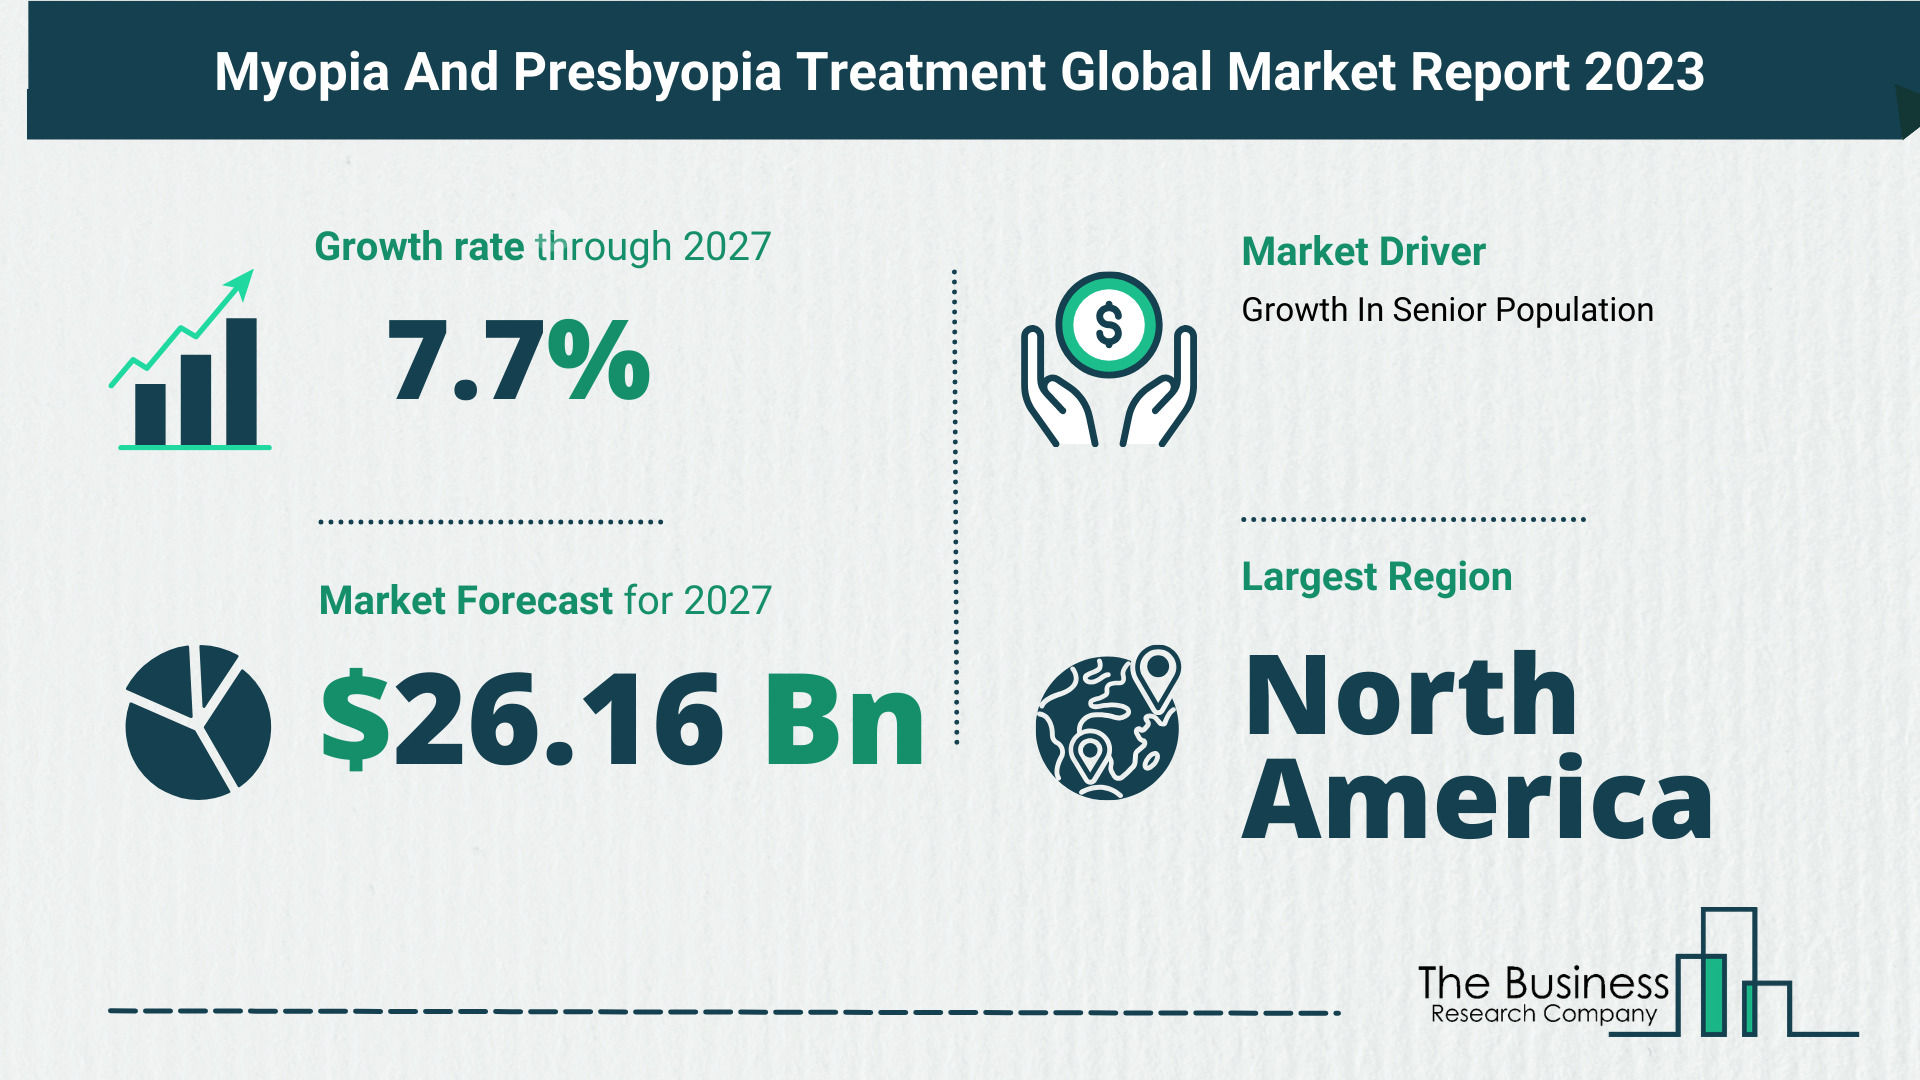 Overview Of The Myopia And Presbyopia Treatment Market 2023: Size, Drivers, And Trends